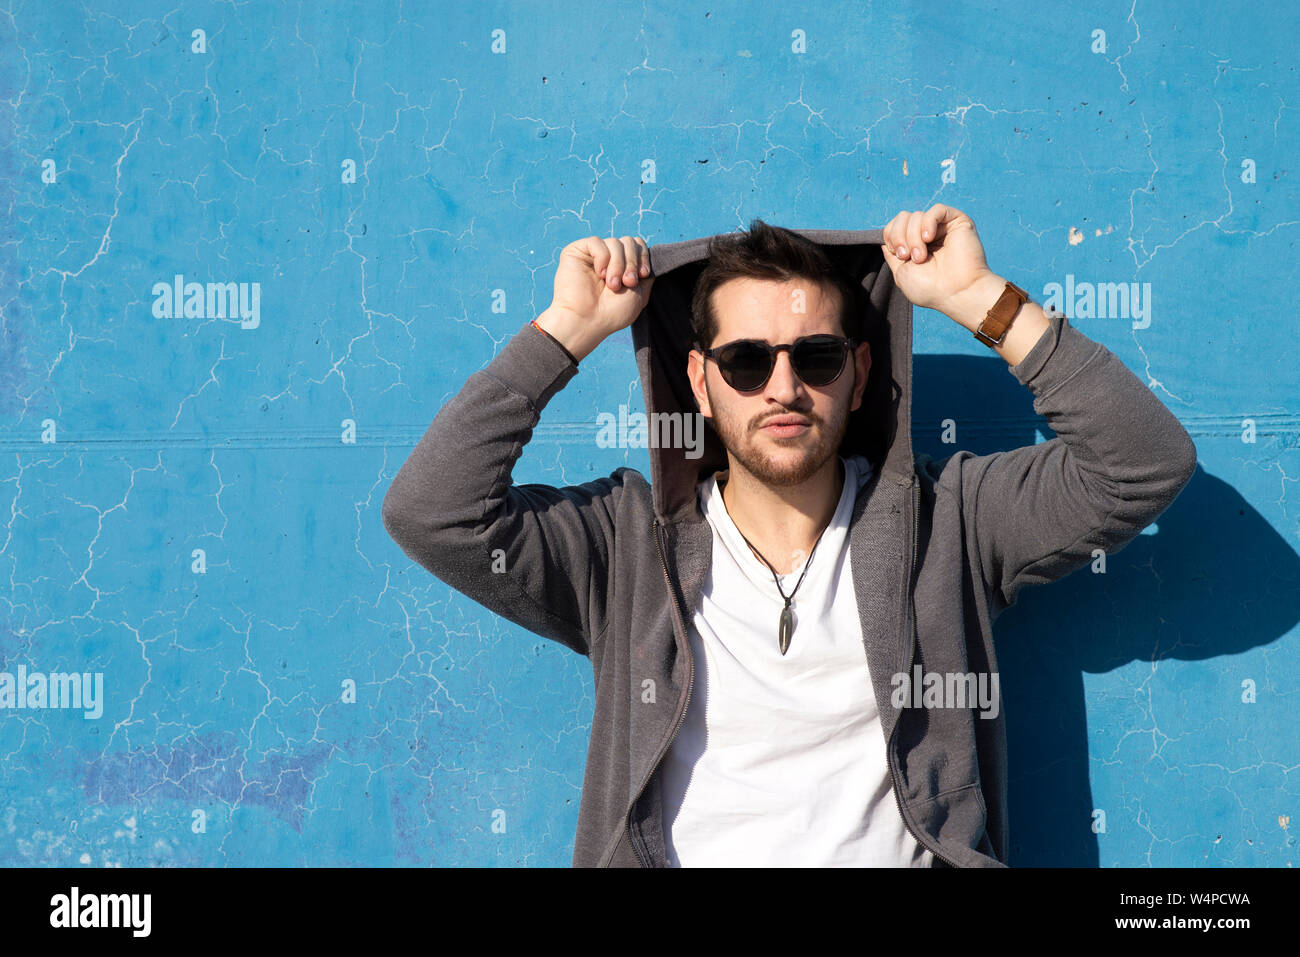 Young bearded man leaning on blue wall wearing sunglasses Stock Photo